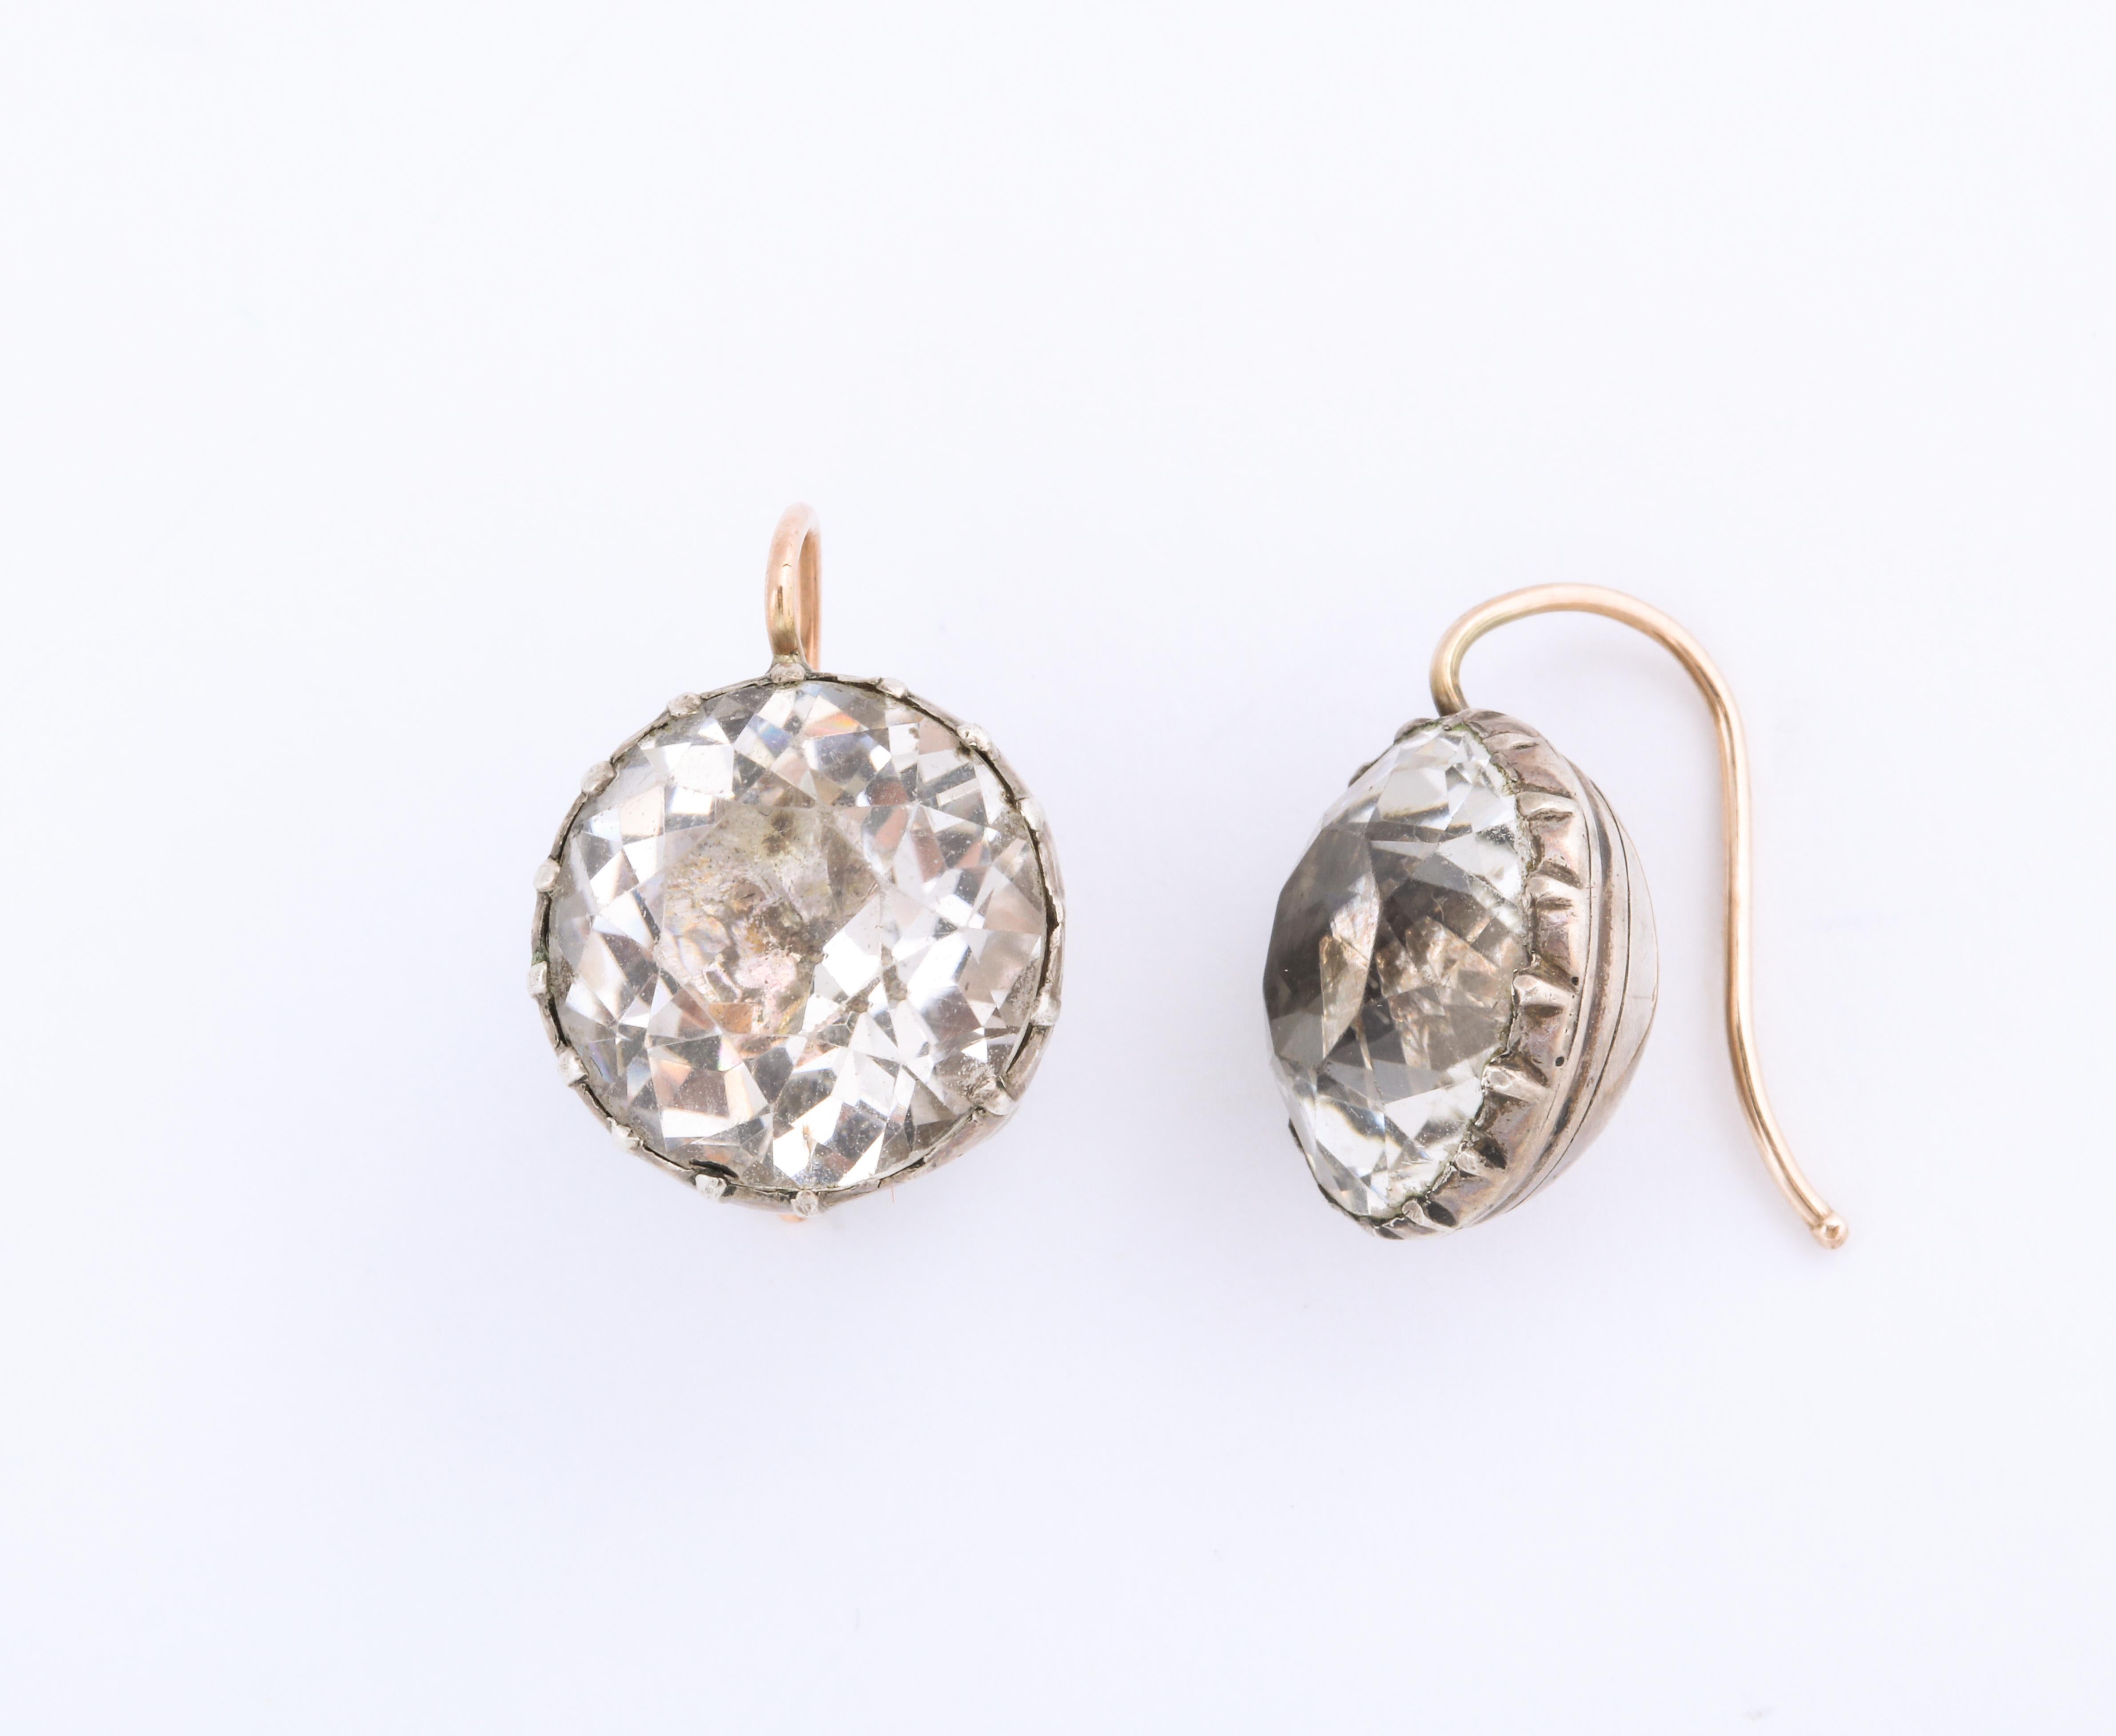  Georgian paste drop earrings of approximately 6 ct each, have become a classic to wear constantly. This lovely faceted pair are set in foiled, round, silver settings with gold ear wires. The size makes them dressy enough for evening. The clear